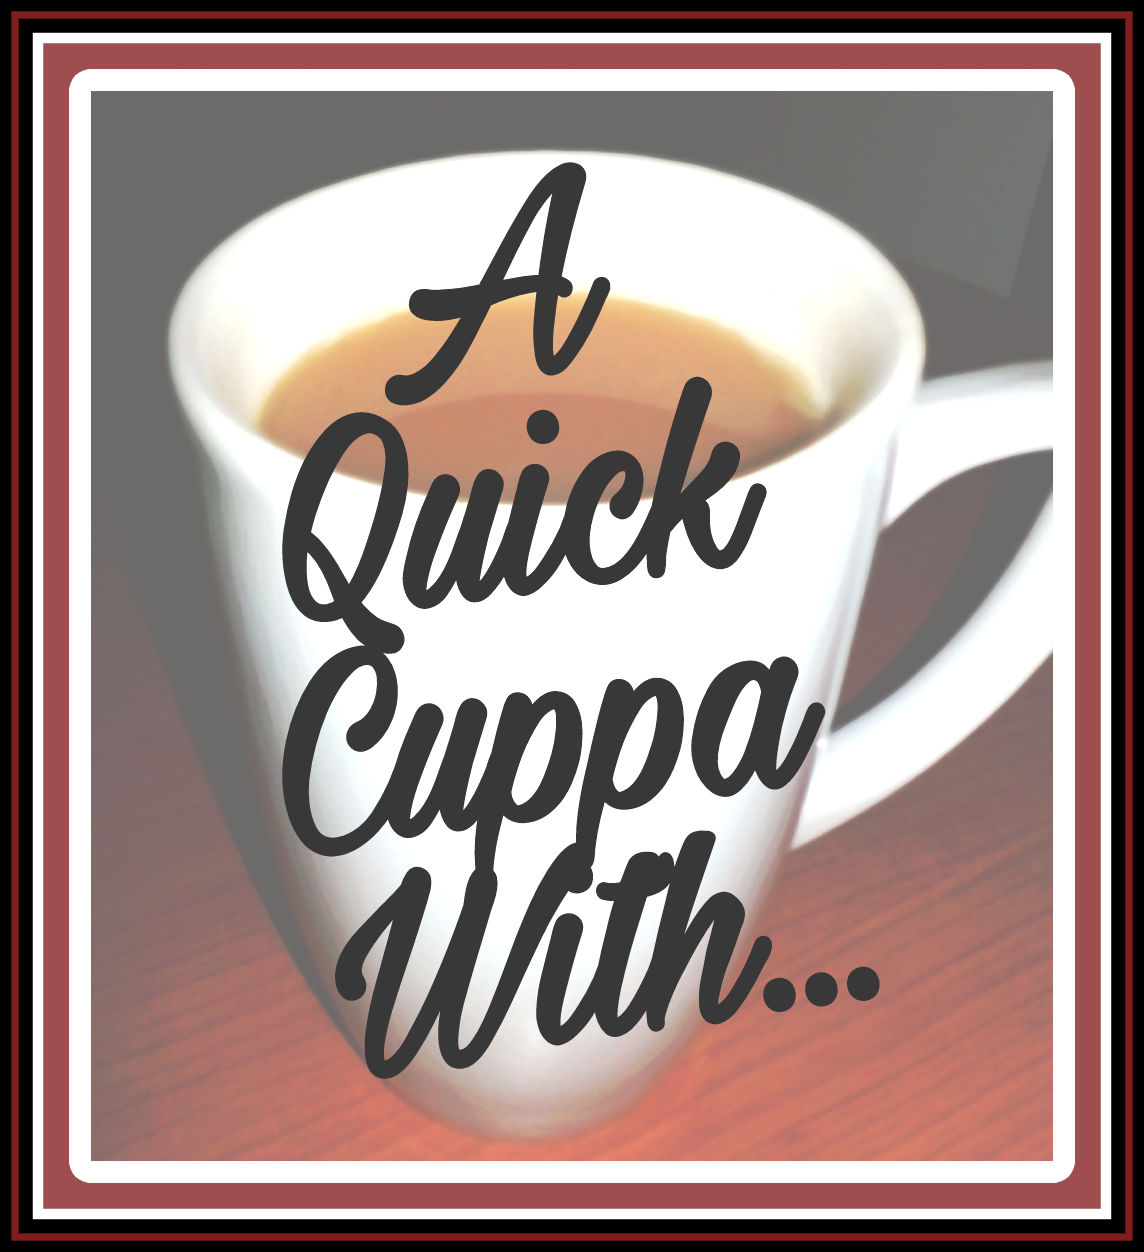 A Quick Cuppa With, Not A Perfect Parent, blogger, guest post, interview, Q and A, Living Life Our Way